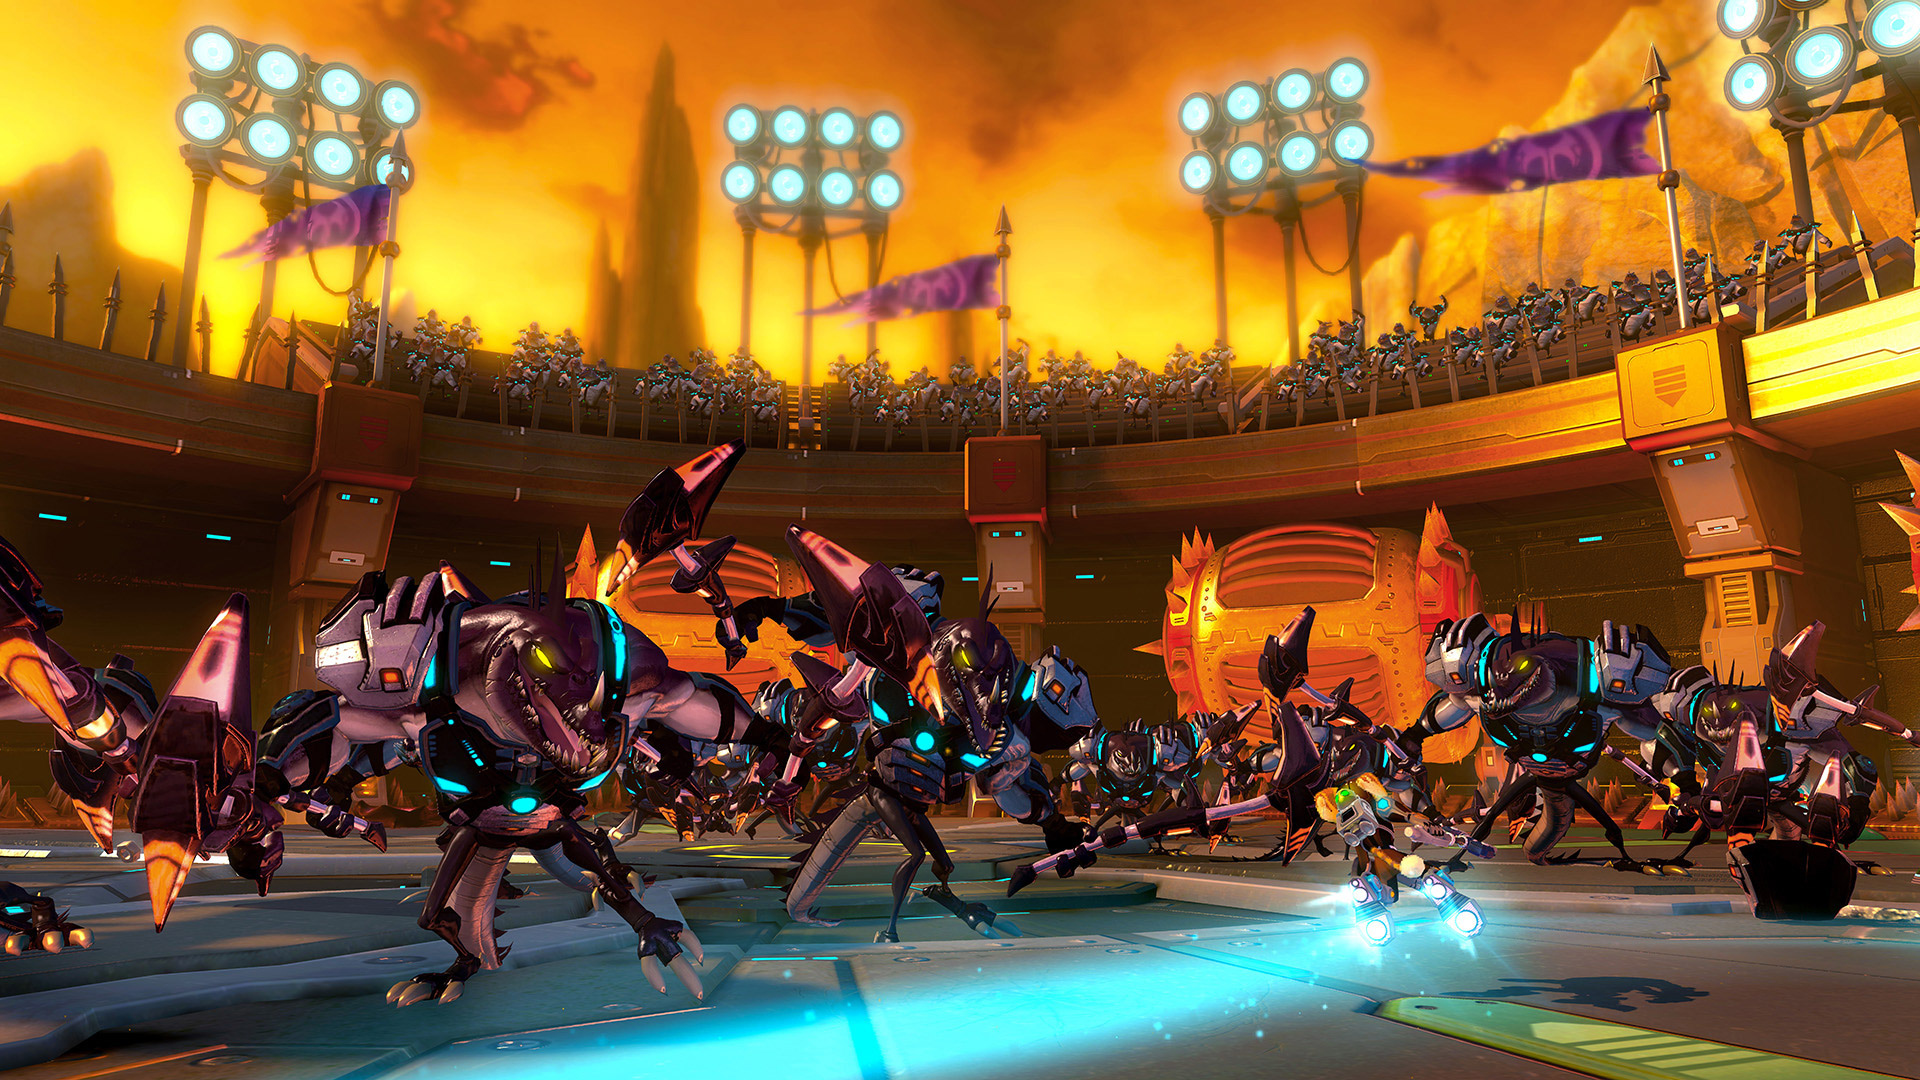 ratchet and clank into the nexus full game download free